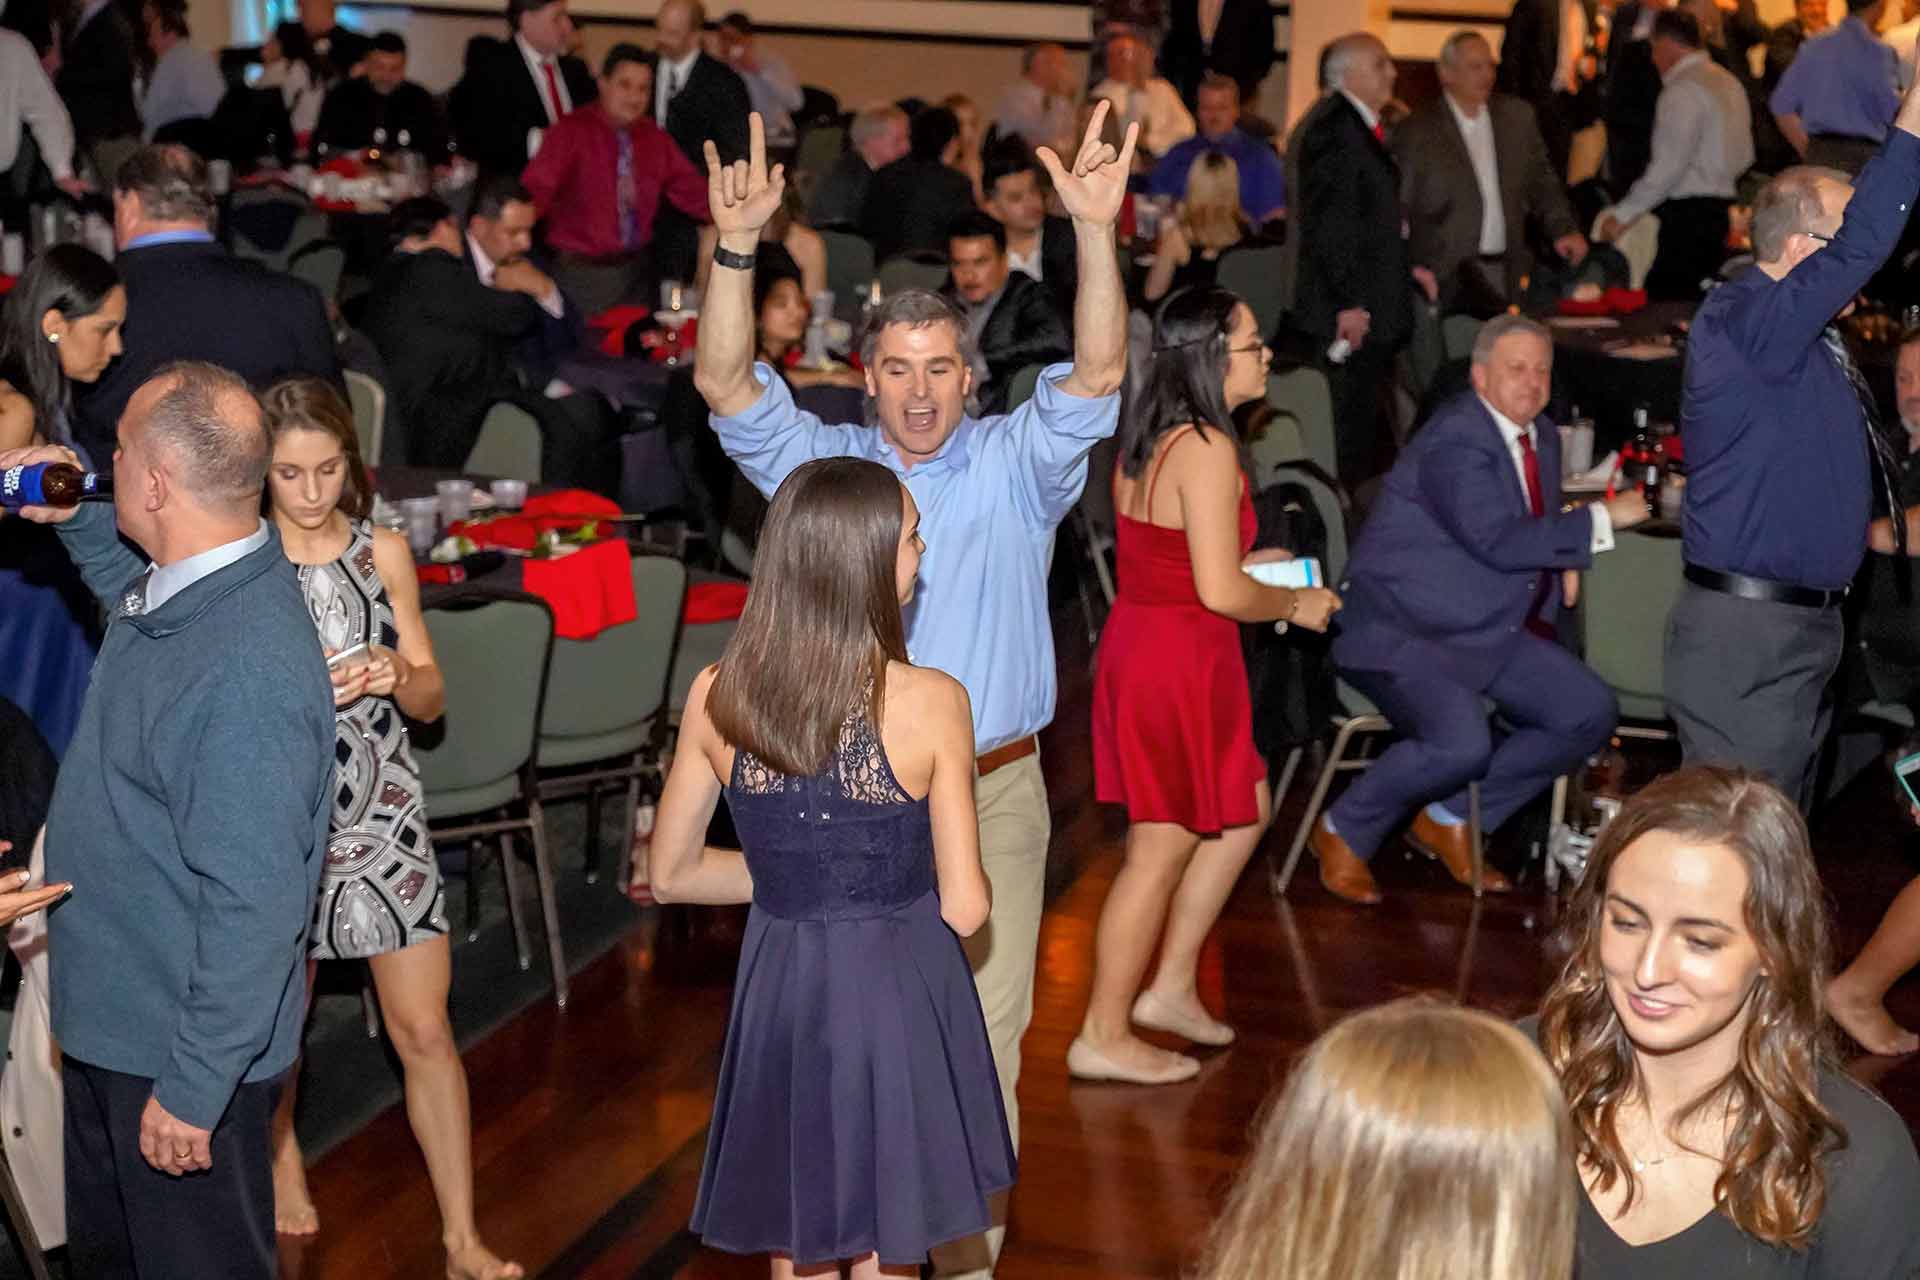 father-daughter-dance-2019-father-having-fun